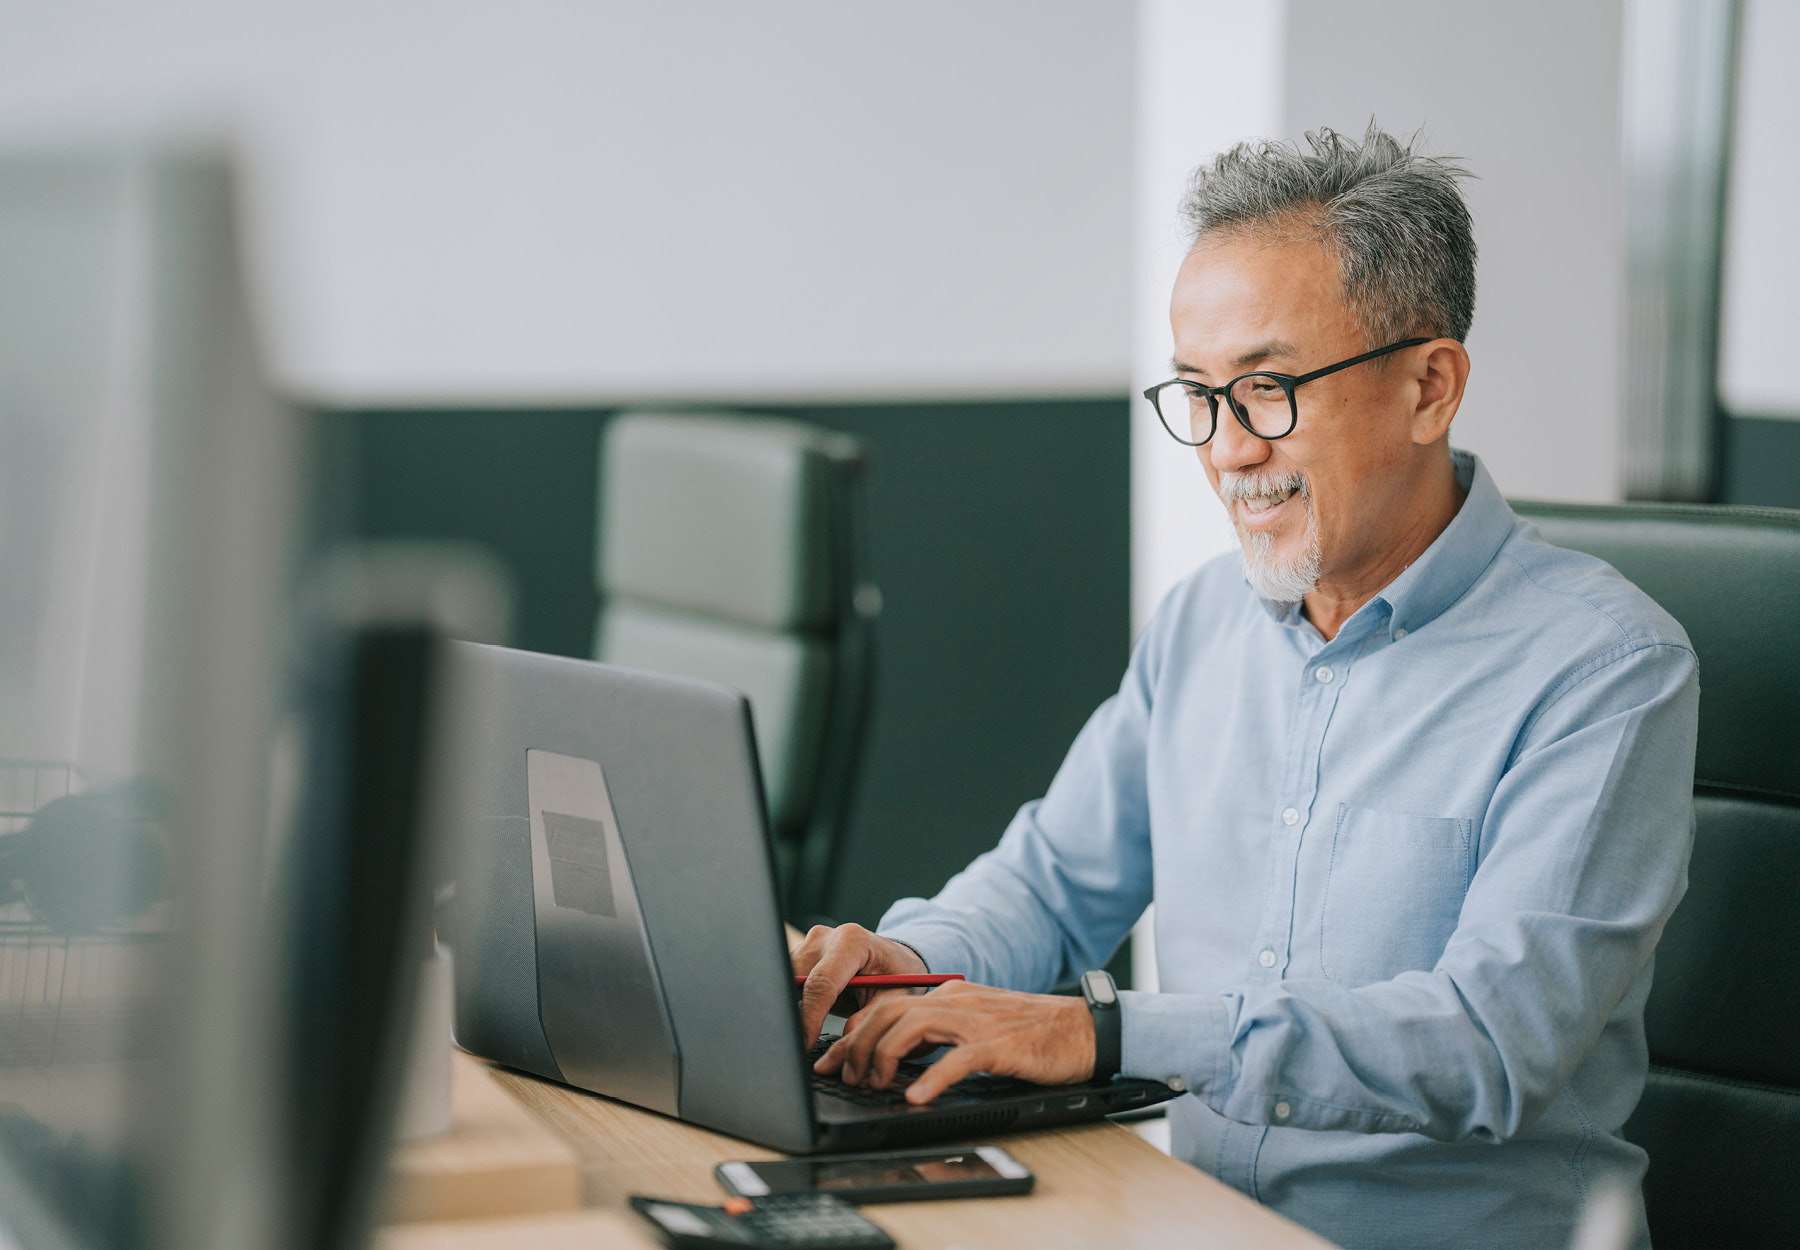 A middle-aged man of Asian descent types on a computer in an office. He is wearing glasses and smiling. iStock image.